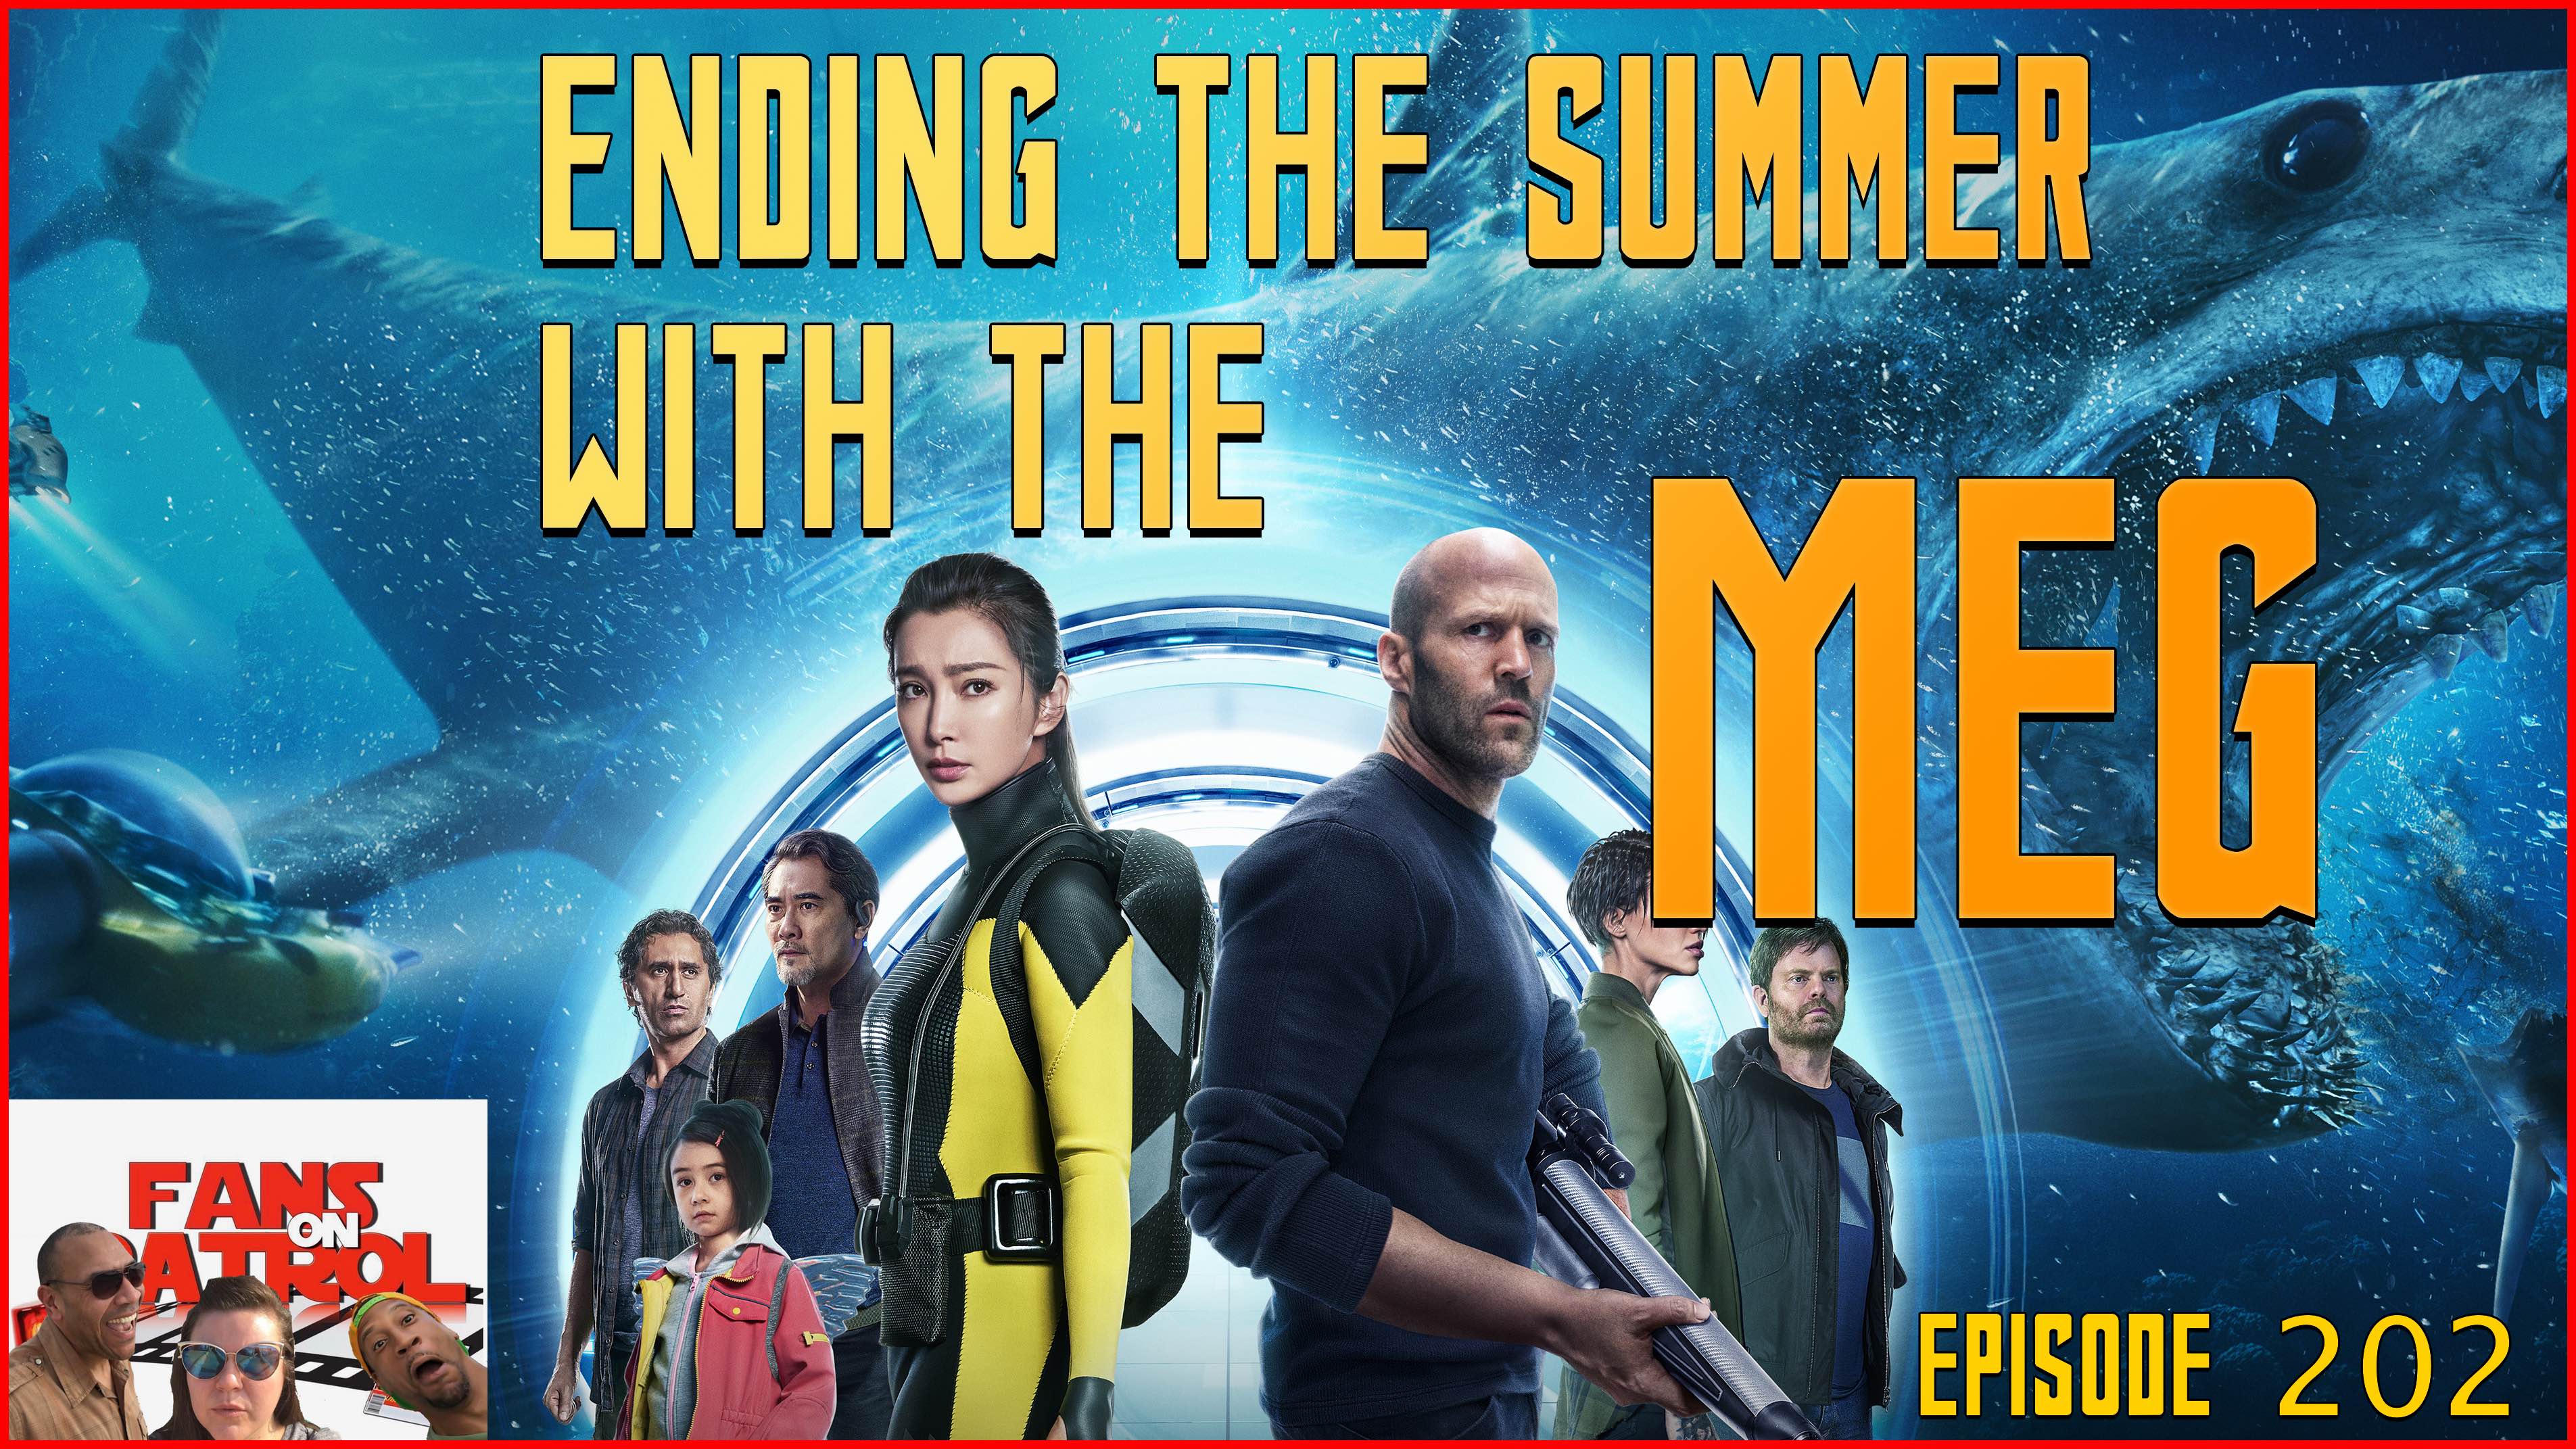 Ending the Summer with the Meg EPISODE 202